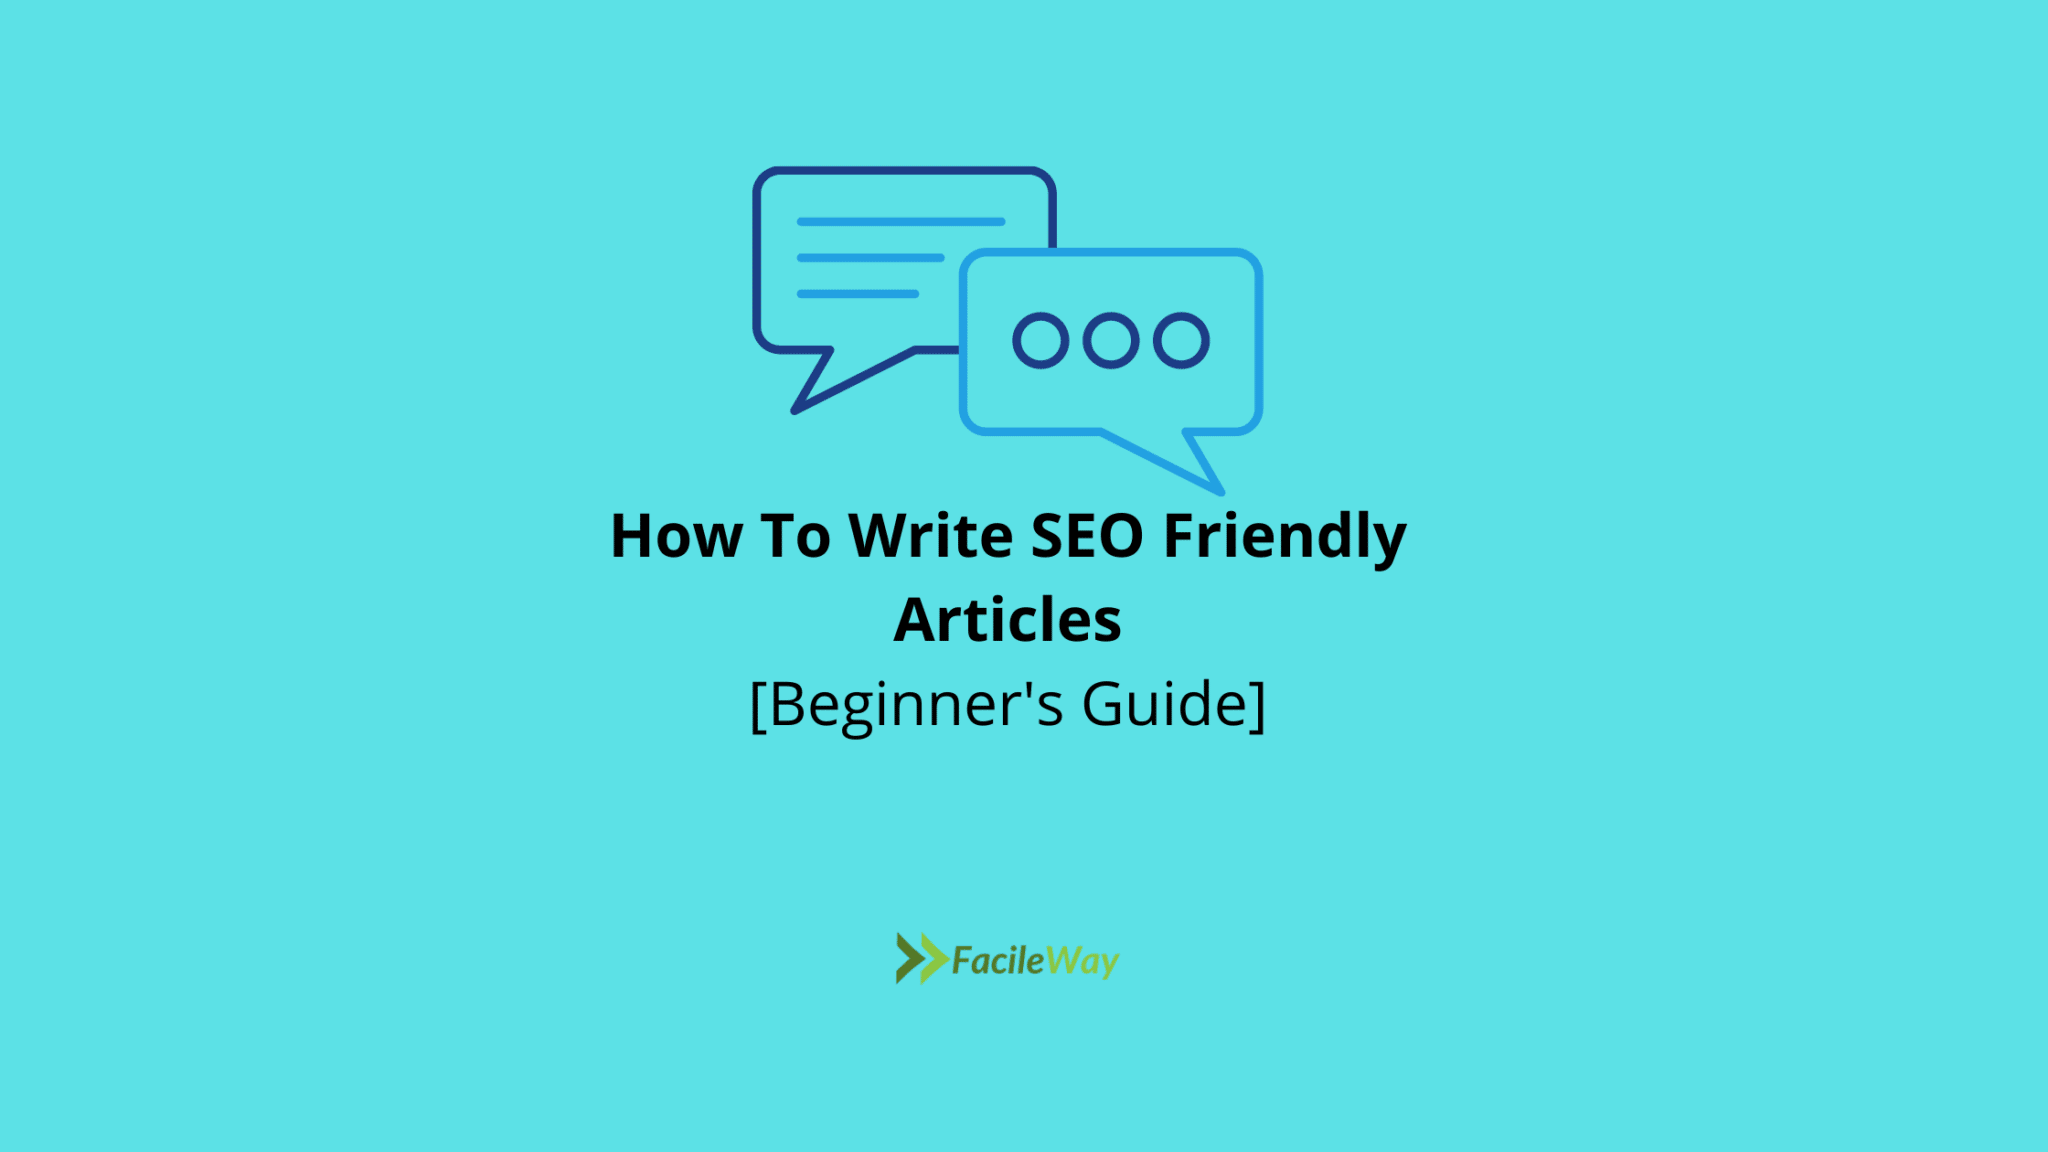 how to write seo articles for beginners